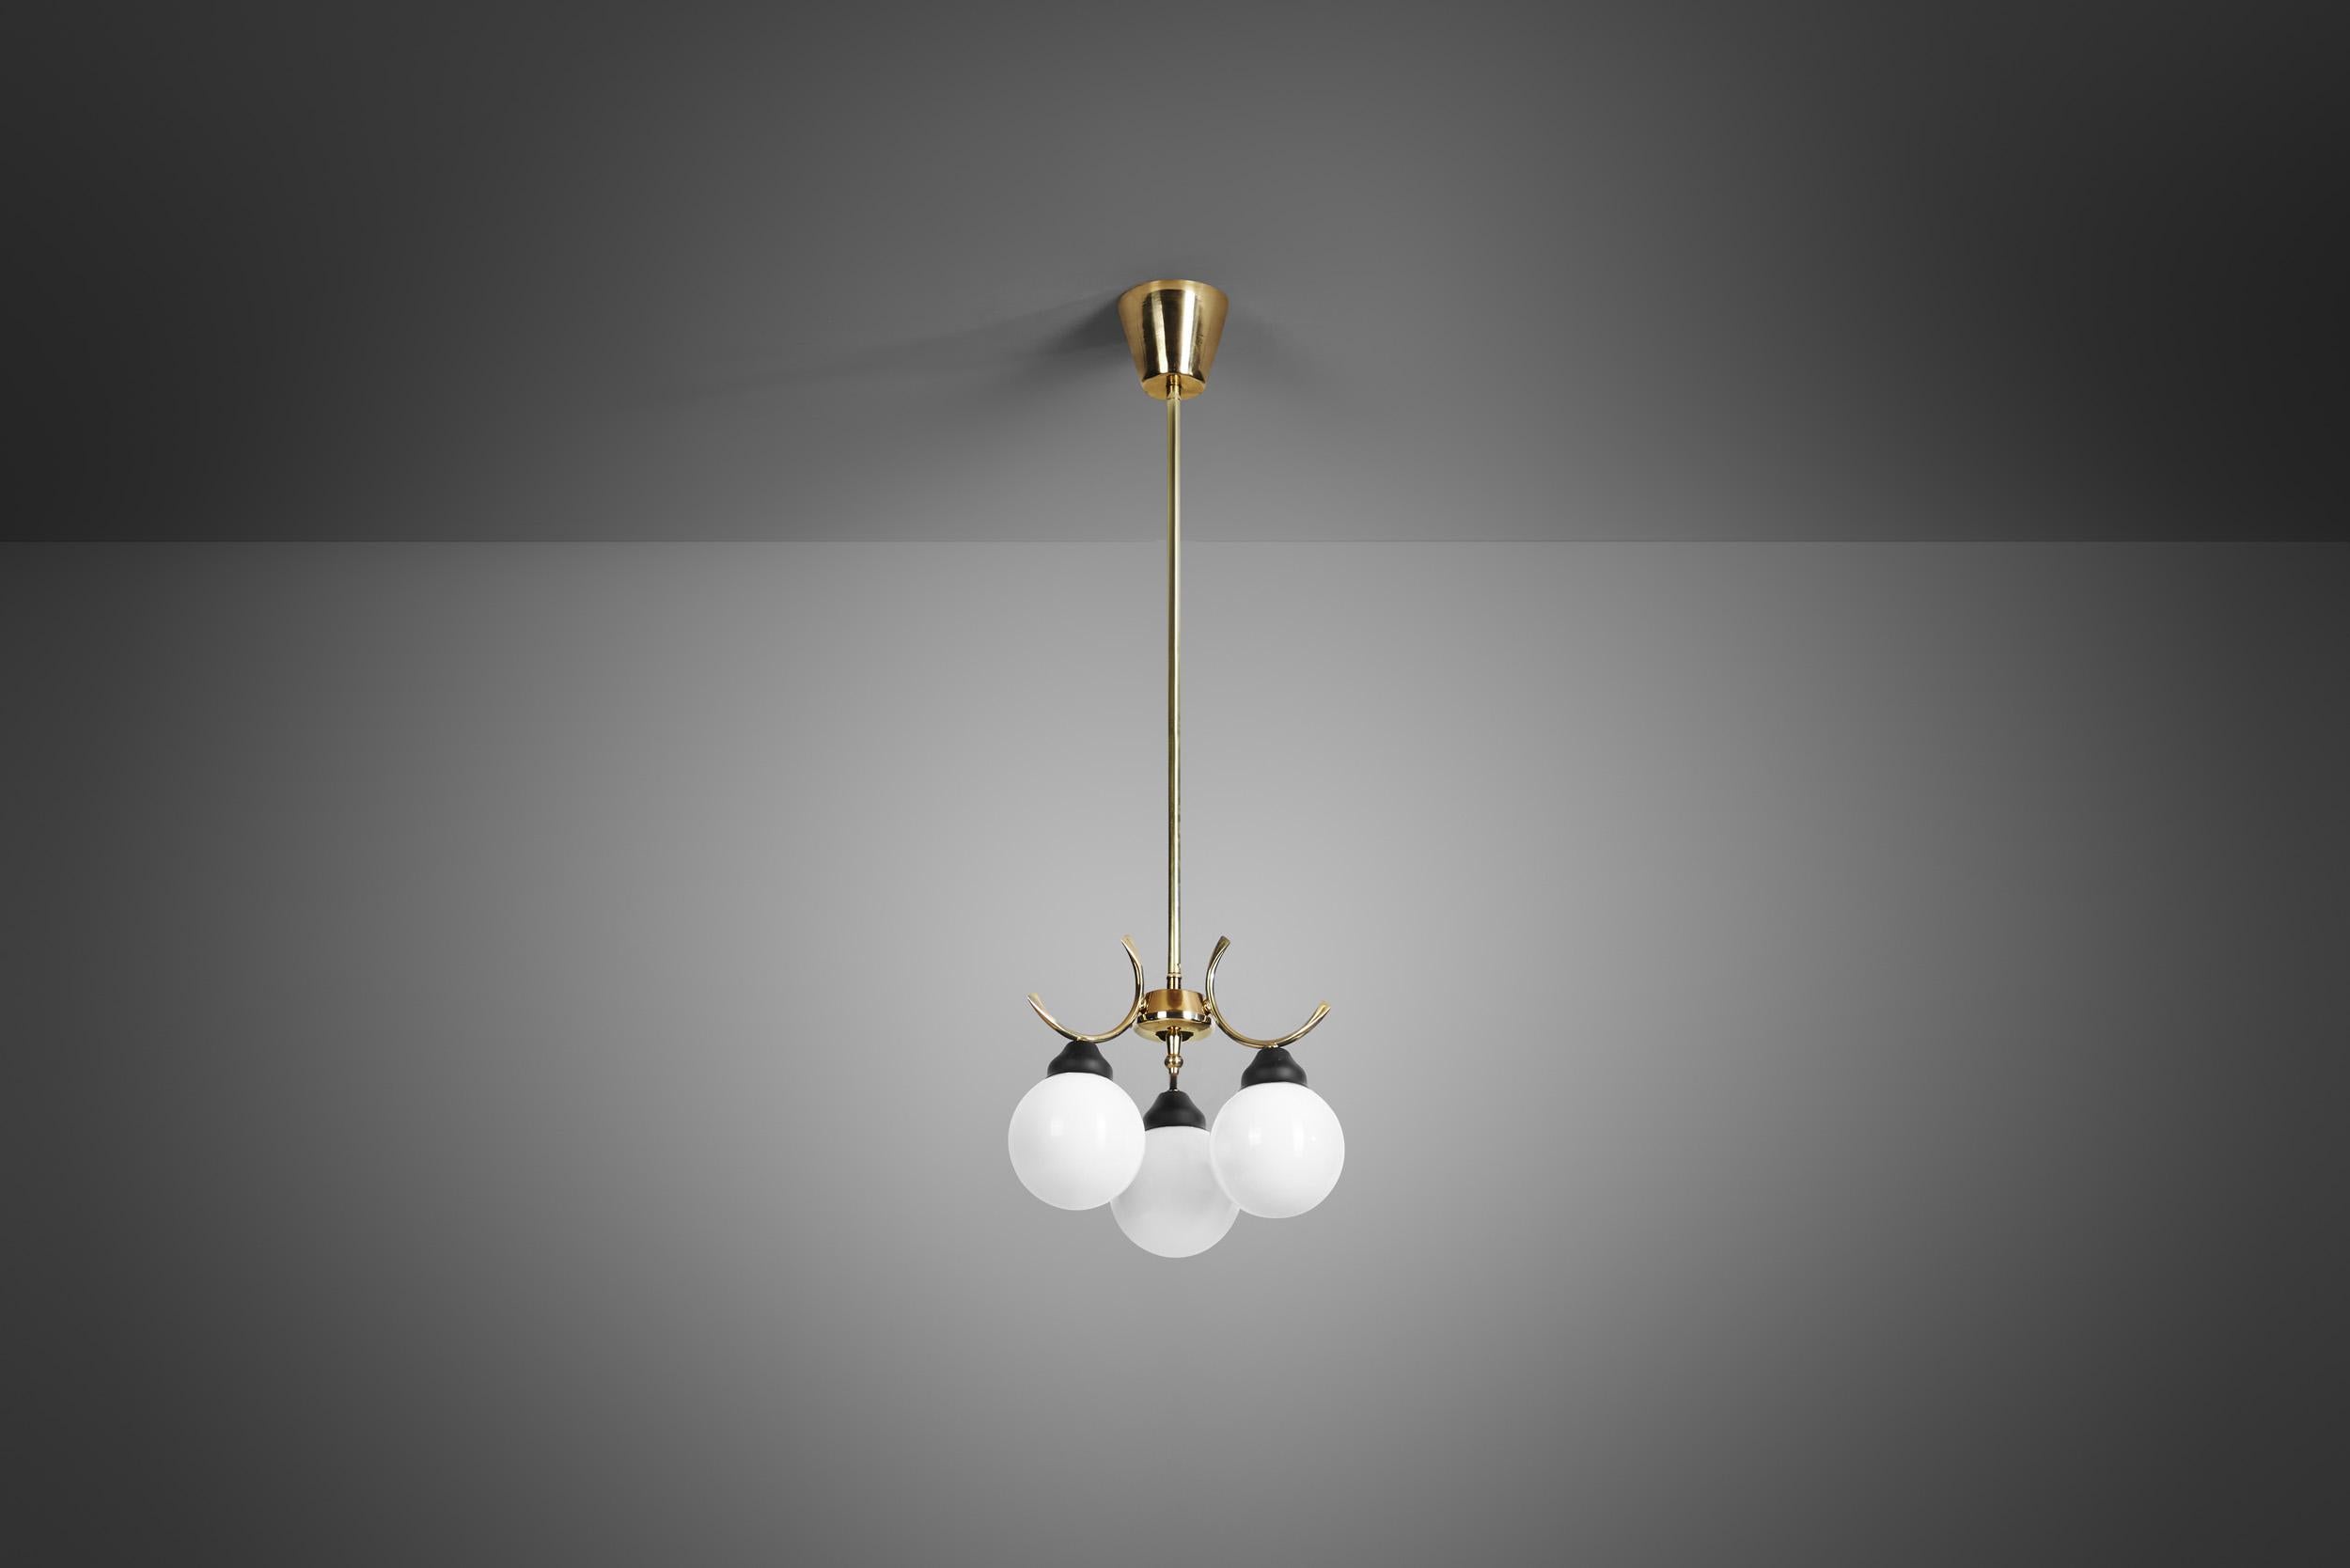 Mid-20th Century Mid-Century Modern Brass and Glass Ceiling Lamp, Europe, circa 1950s For Sale